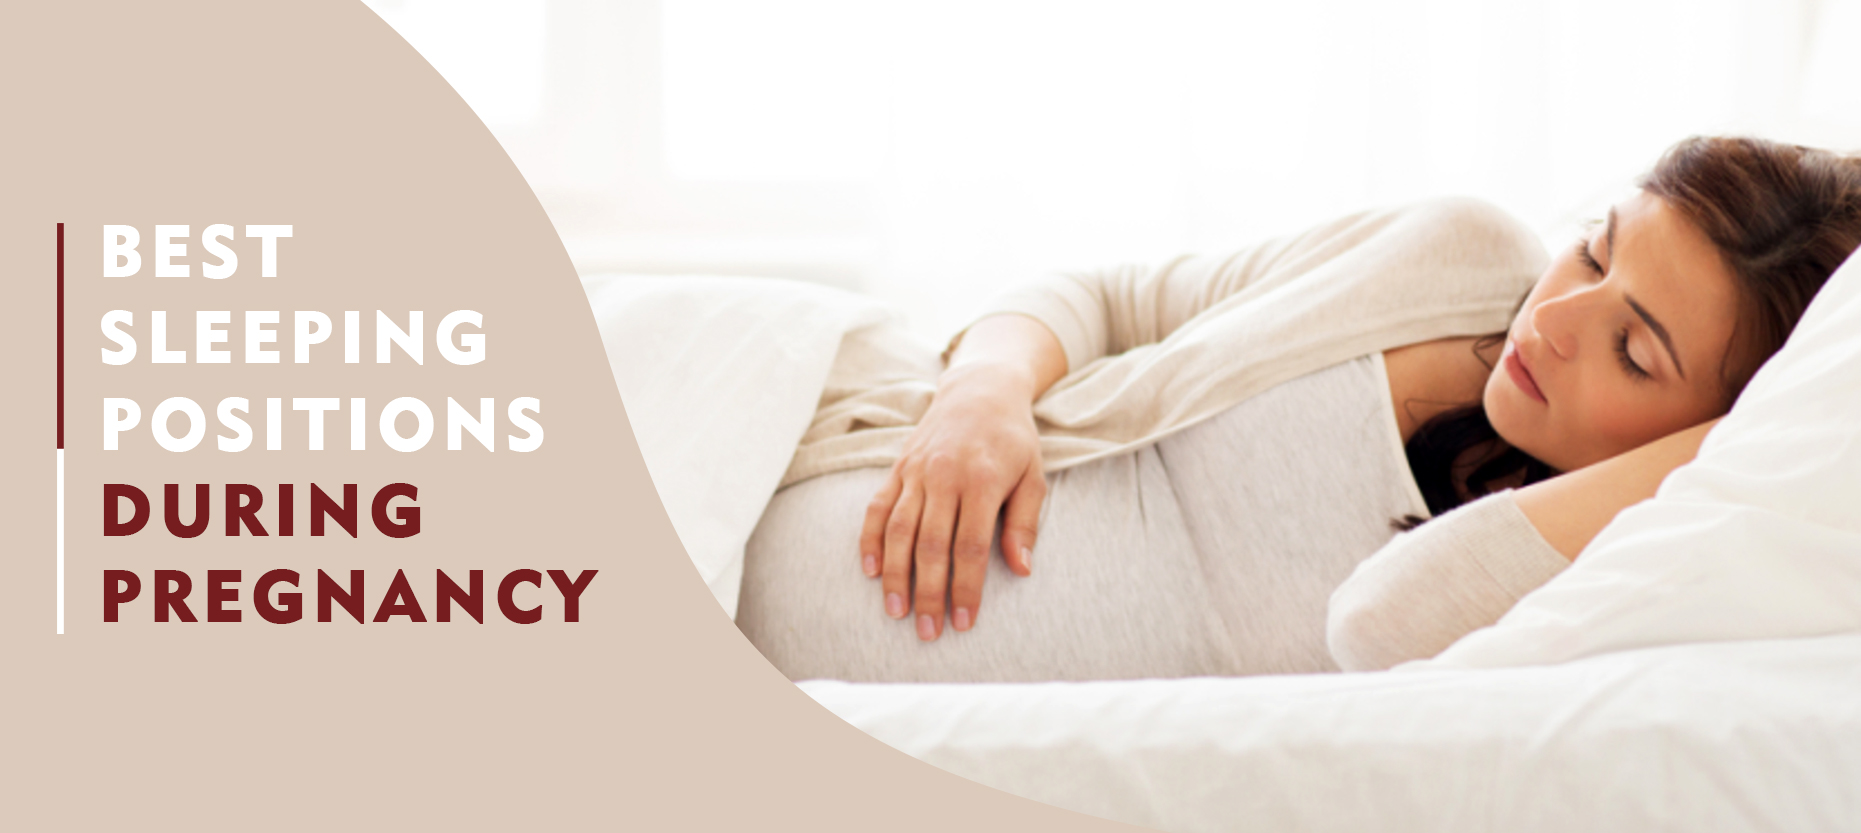 Best Sleeping Positions during Pregnancy